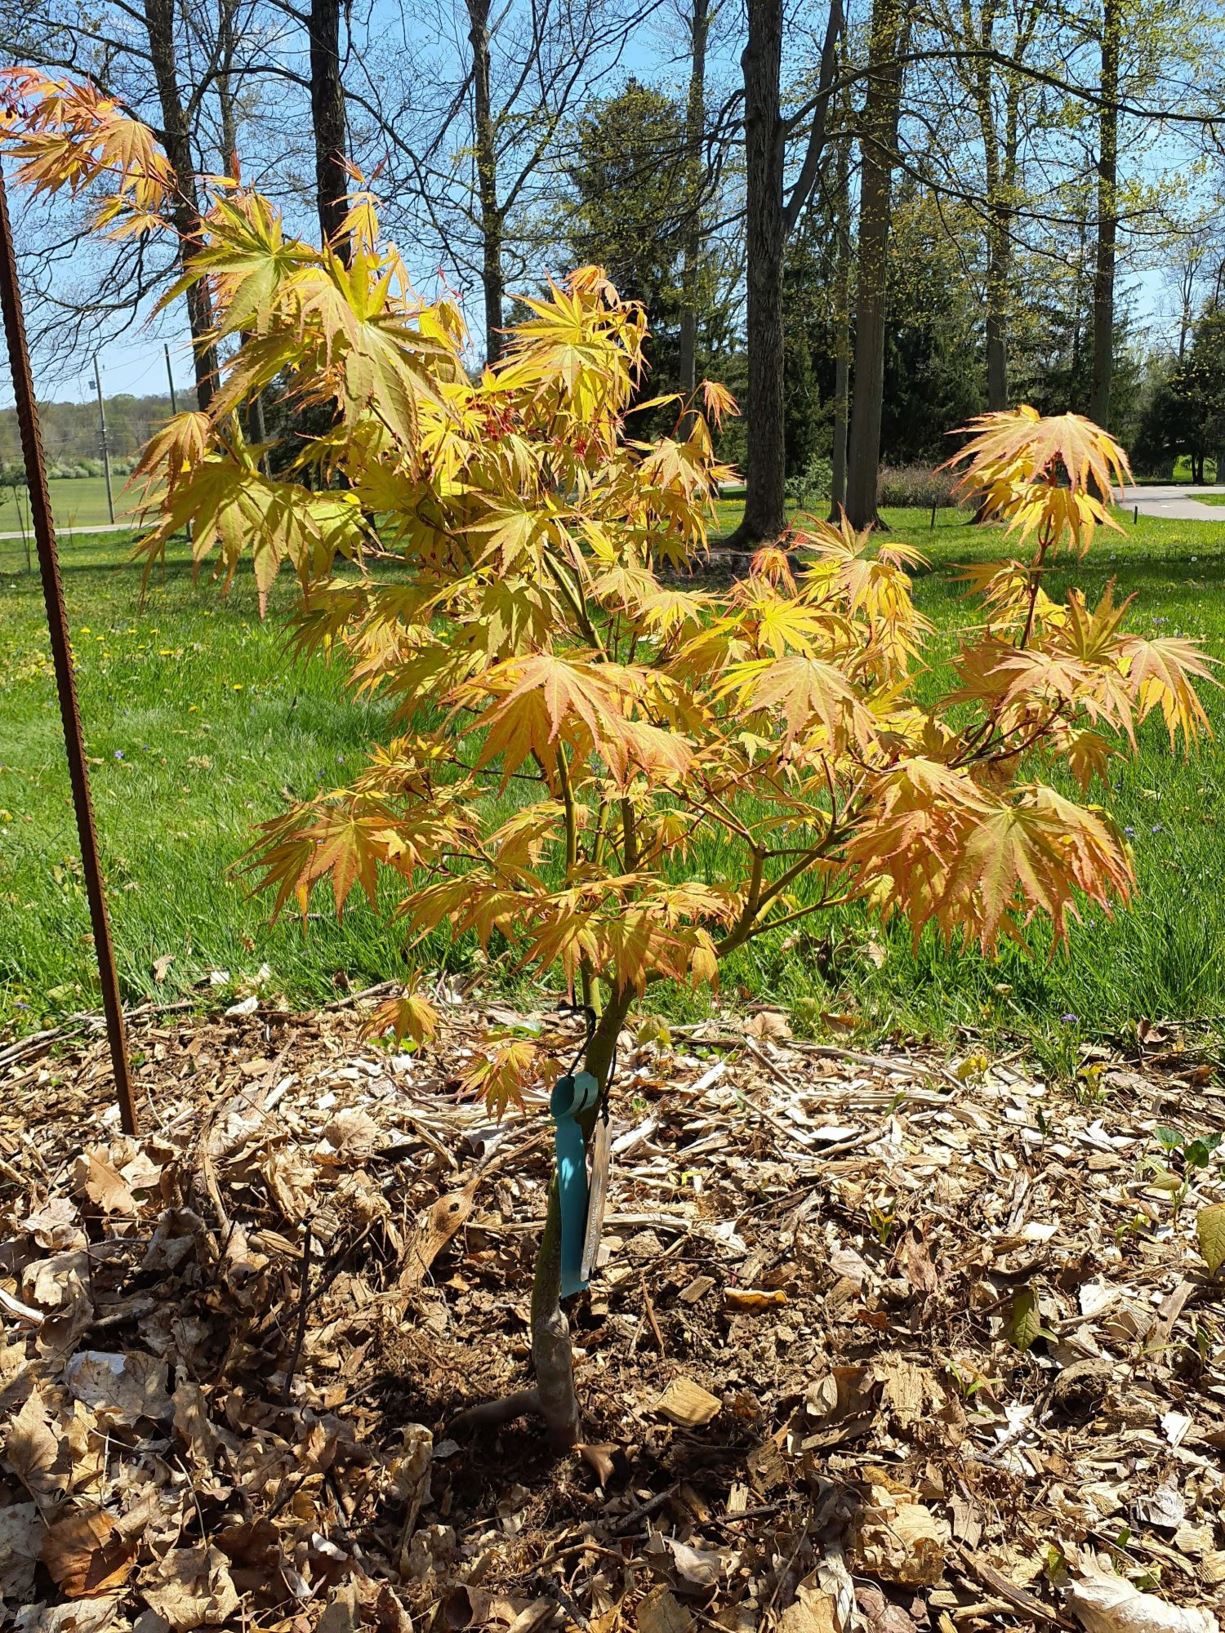 Acer 'Avalanche' - Avalanche maple